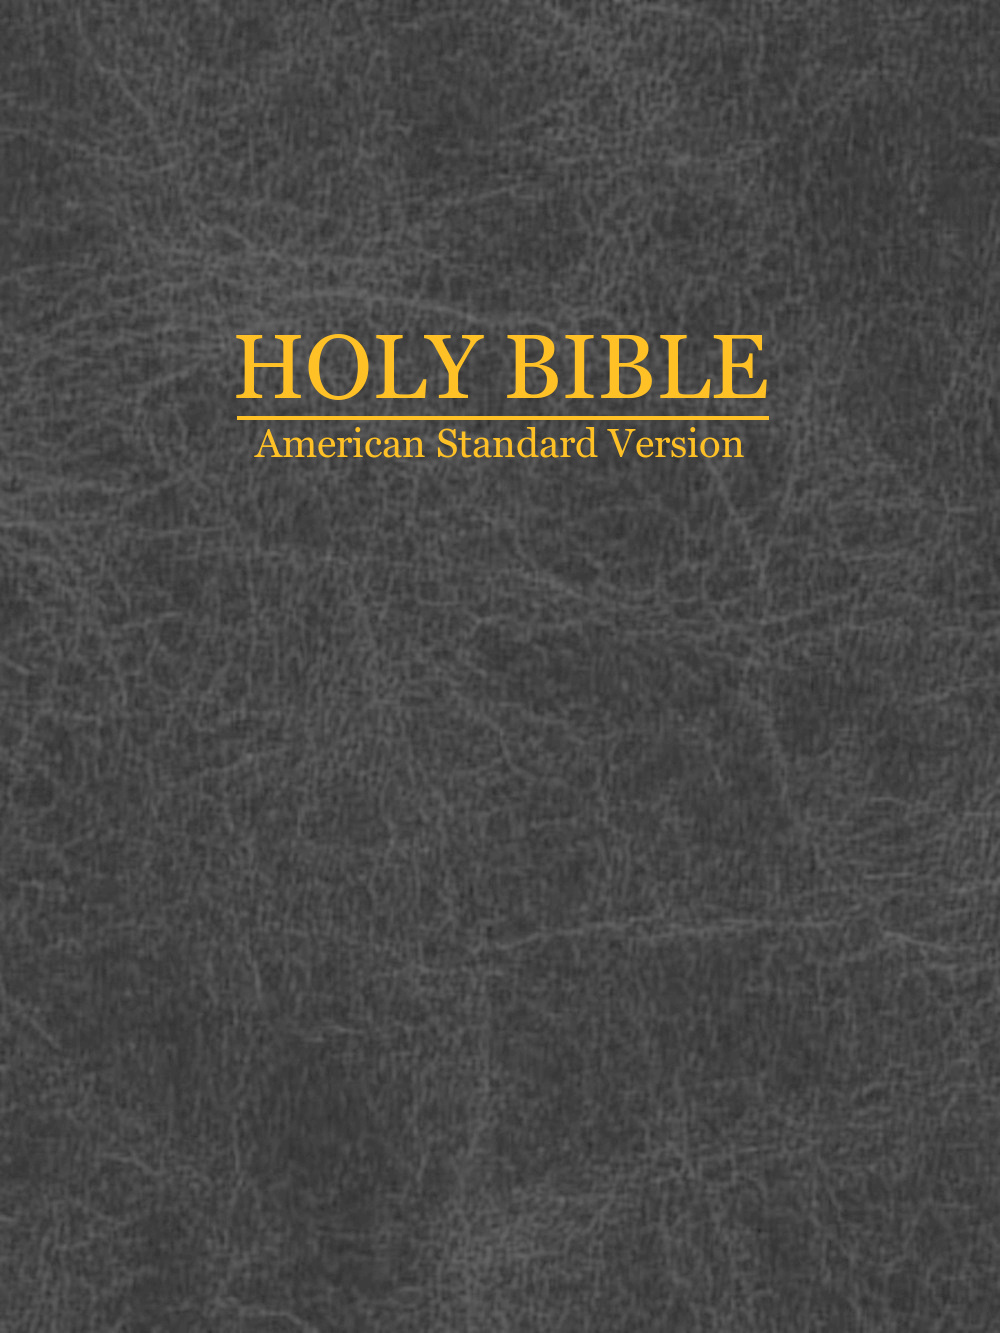 American Standard Version of the Holy Bible (1901